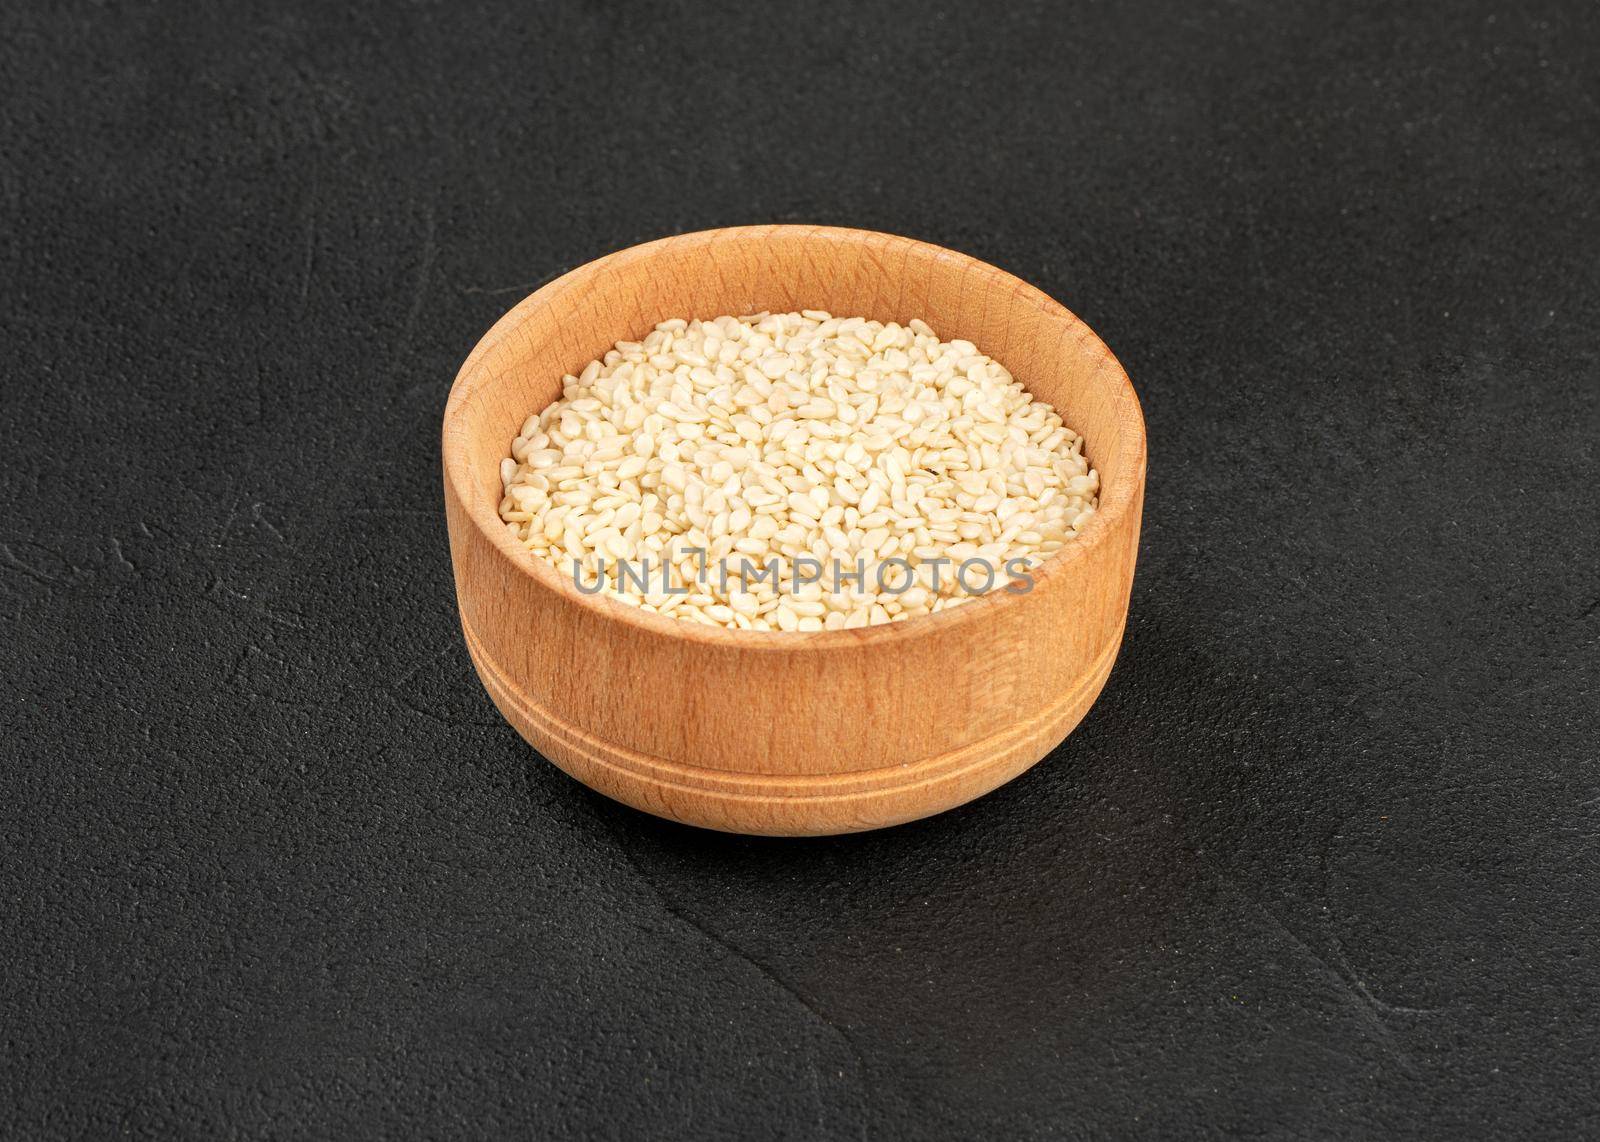 Sesame seeds in a wooden bowl on a dark background